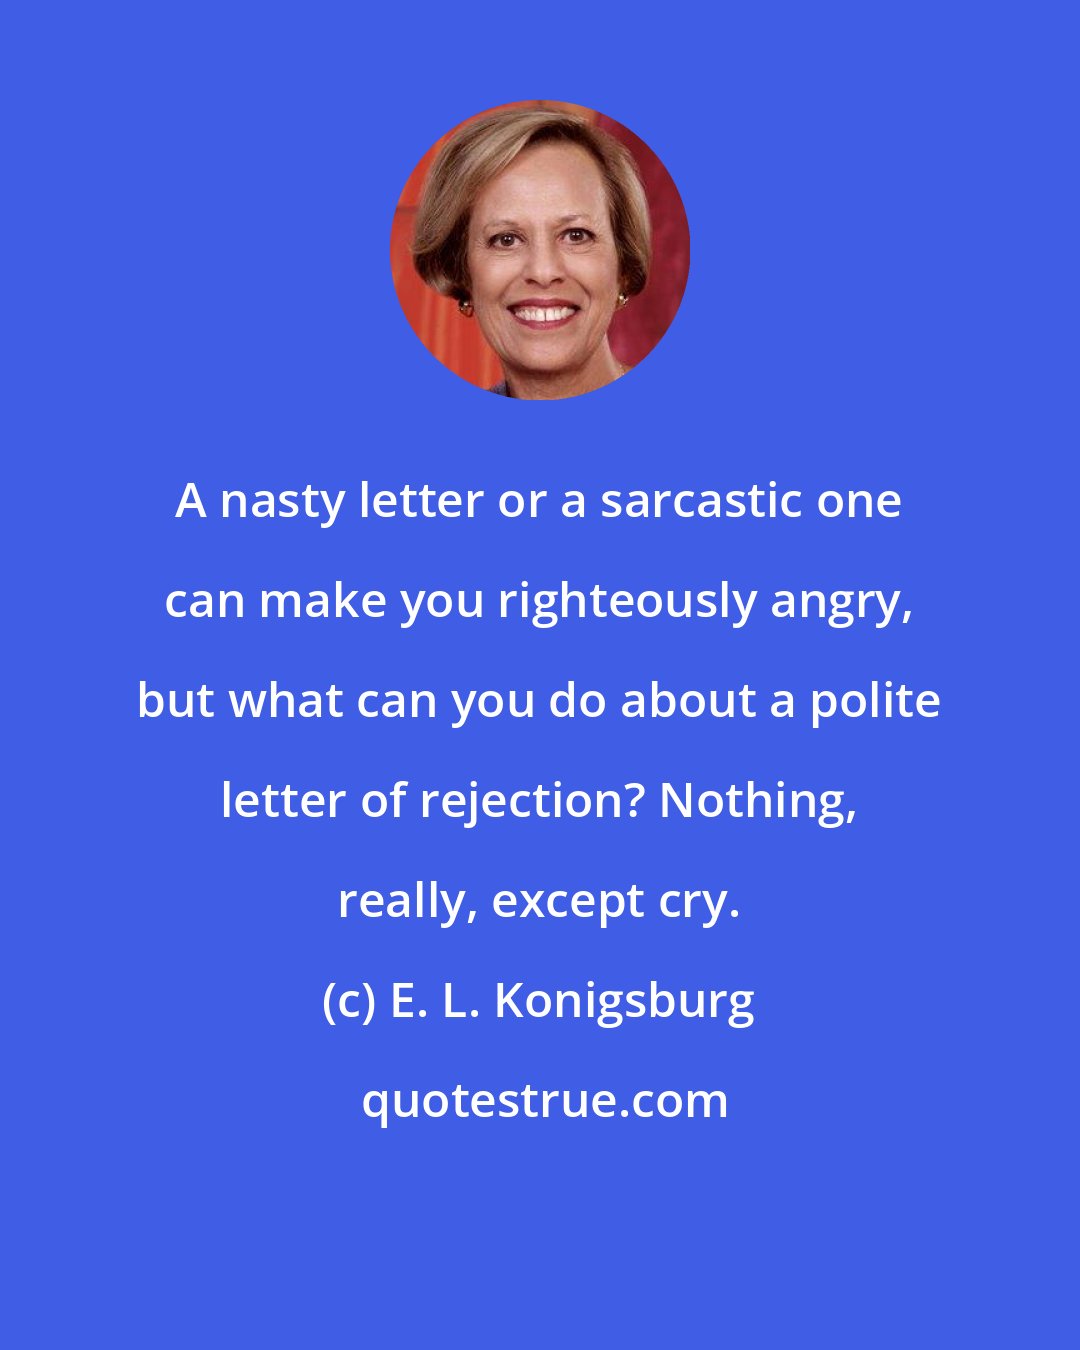 E. L. Konigsburg: A nasty letter or a sarcastic one can make you righteously angry, but what can you do about a polite letter of rejection? Nothing, really, except cry.